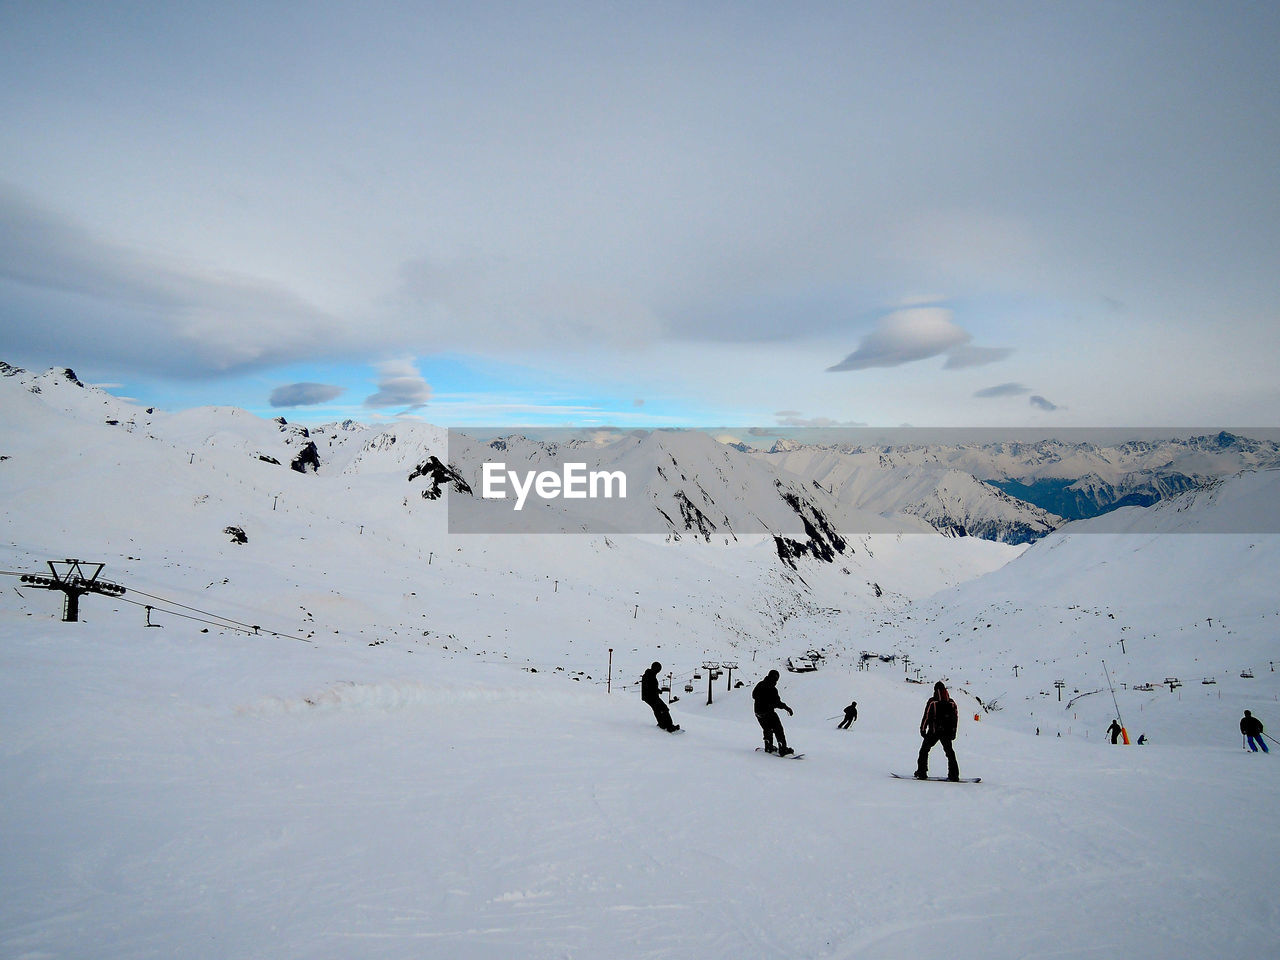 Silhouette people skiing on ski slope against cloudy sky